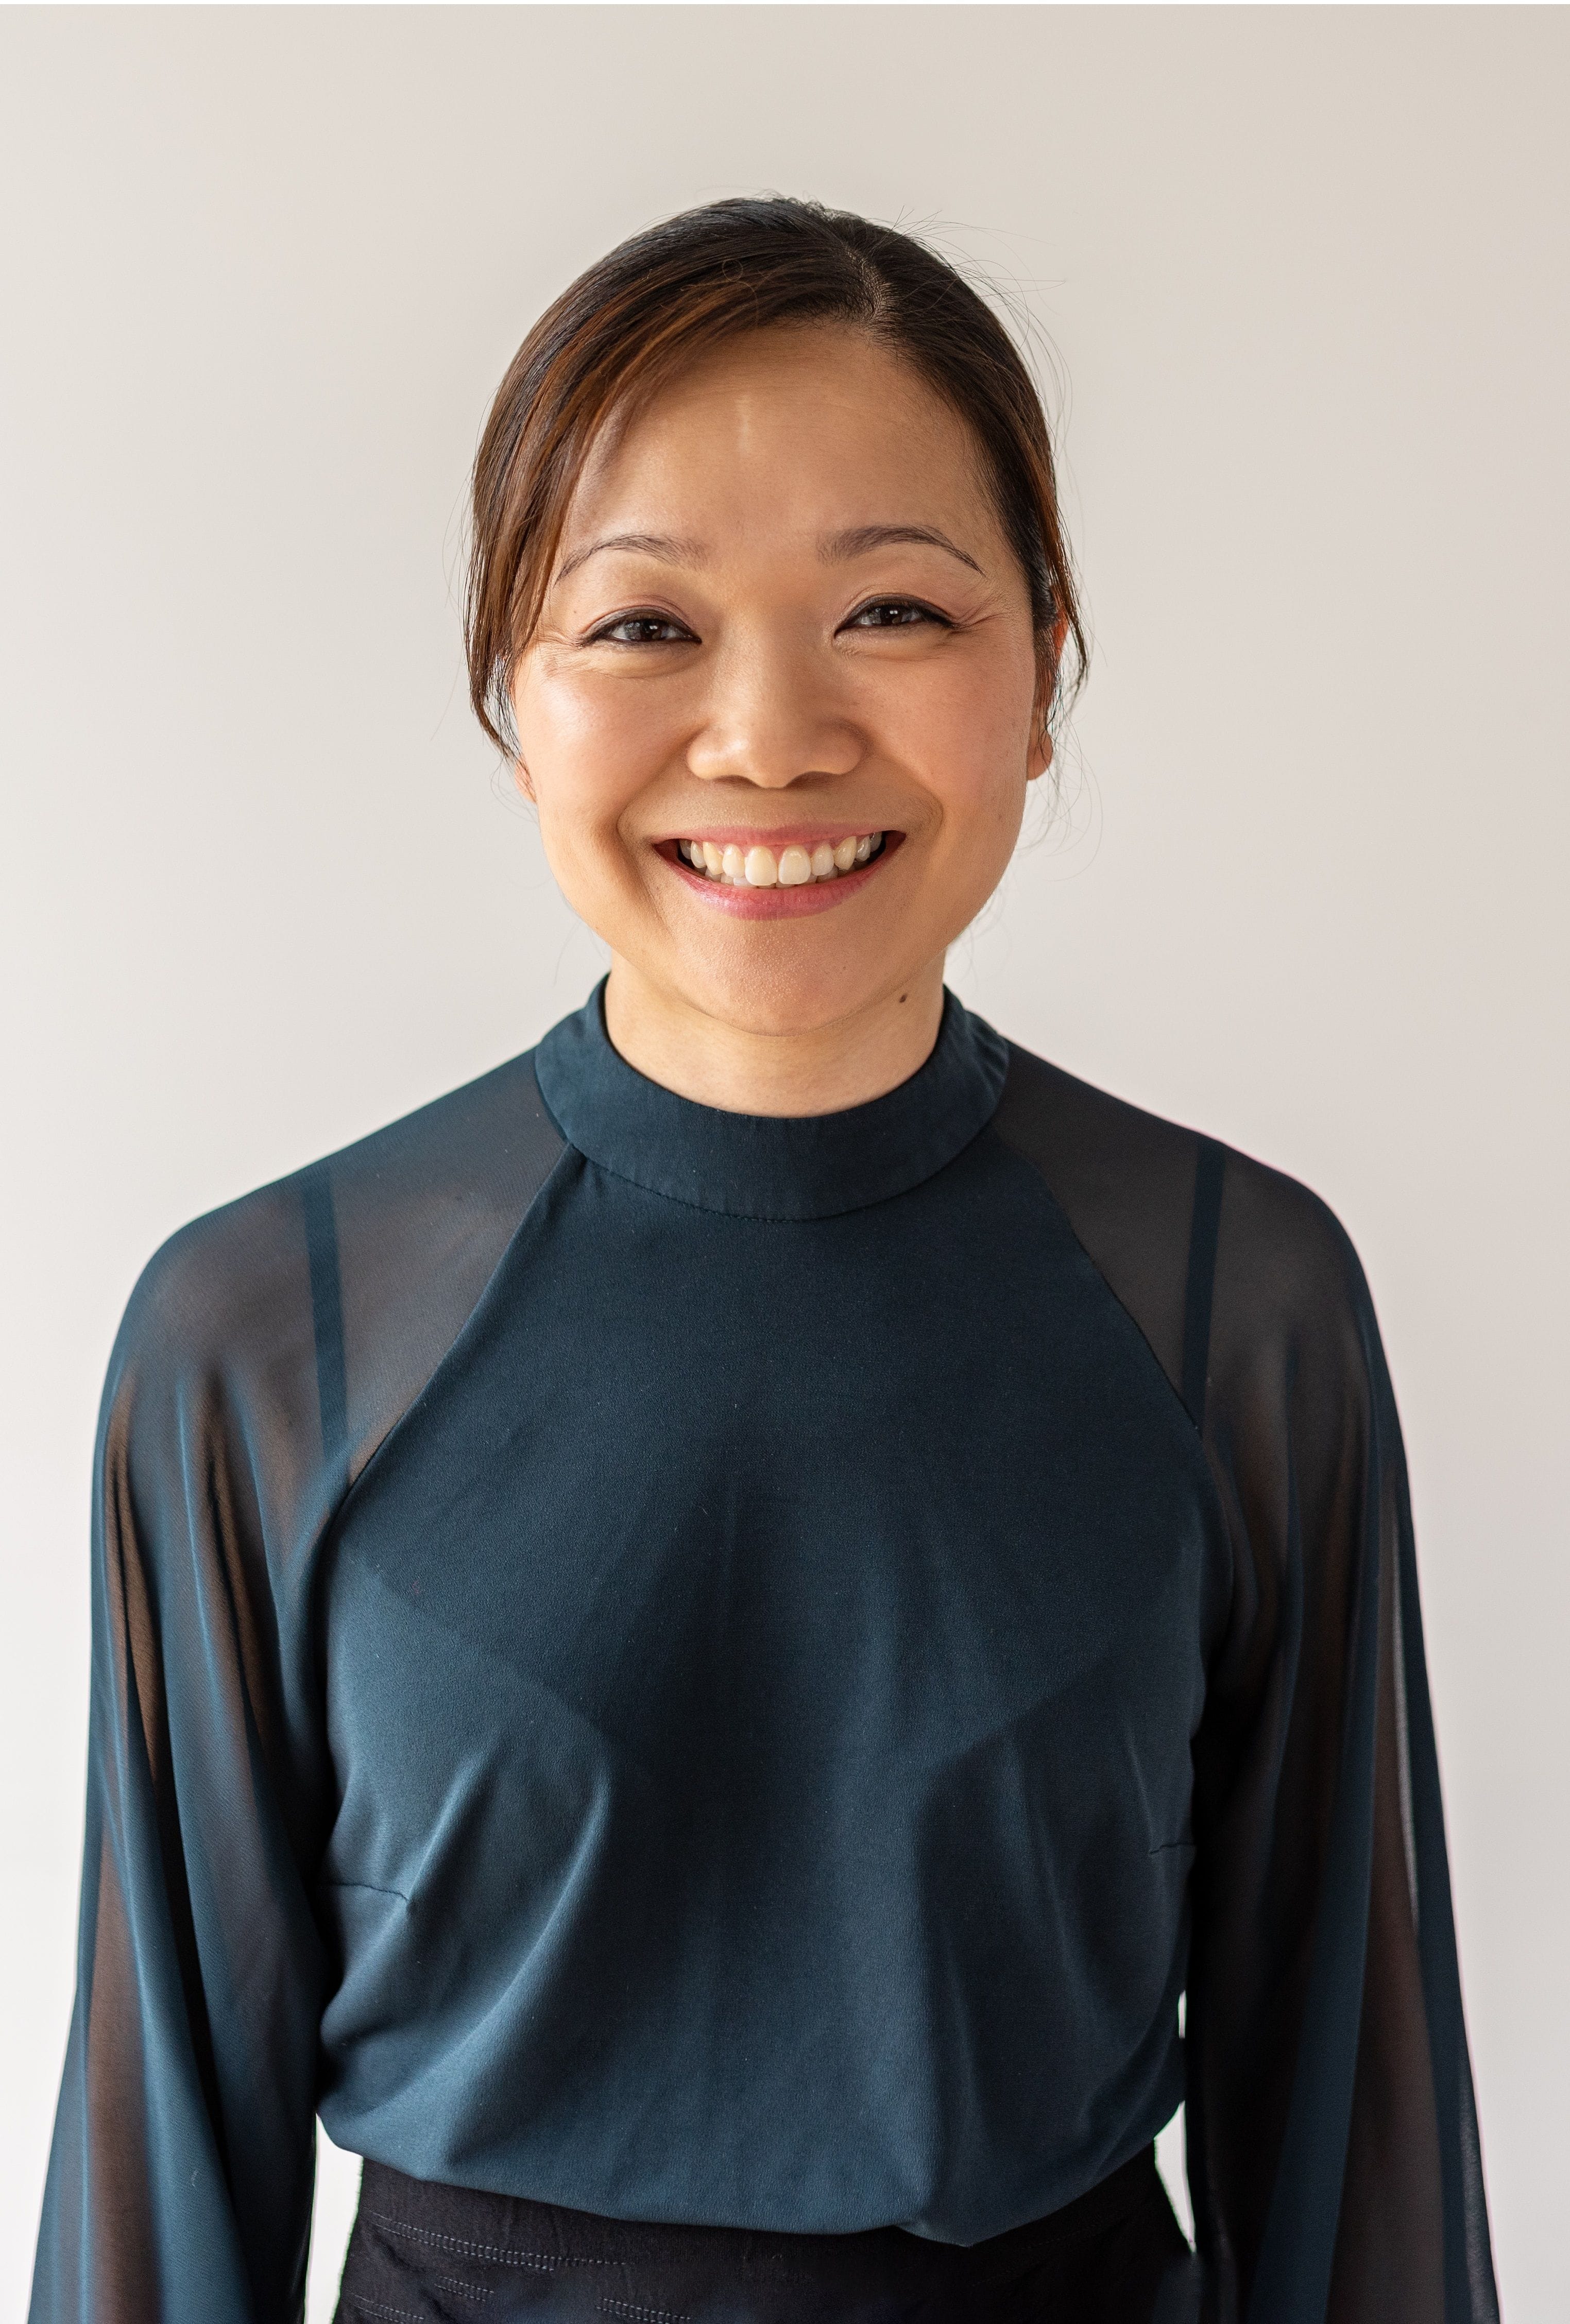 Dr Catherine Chan